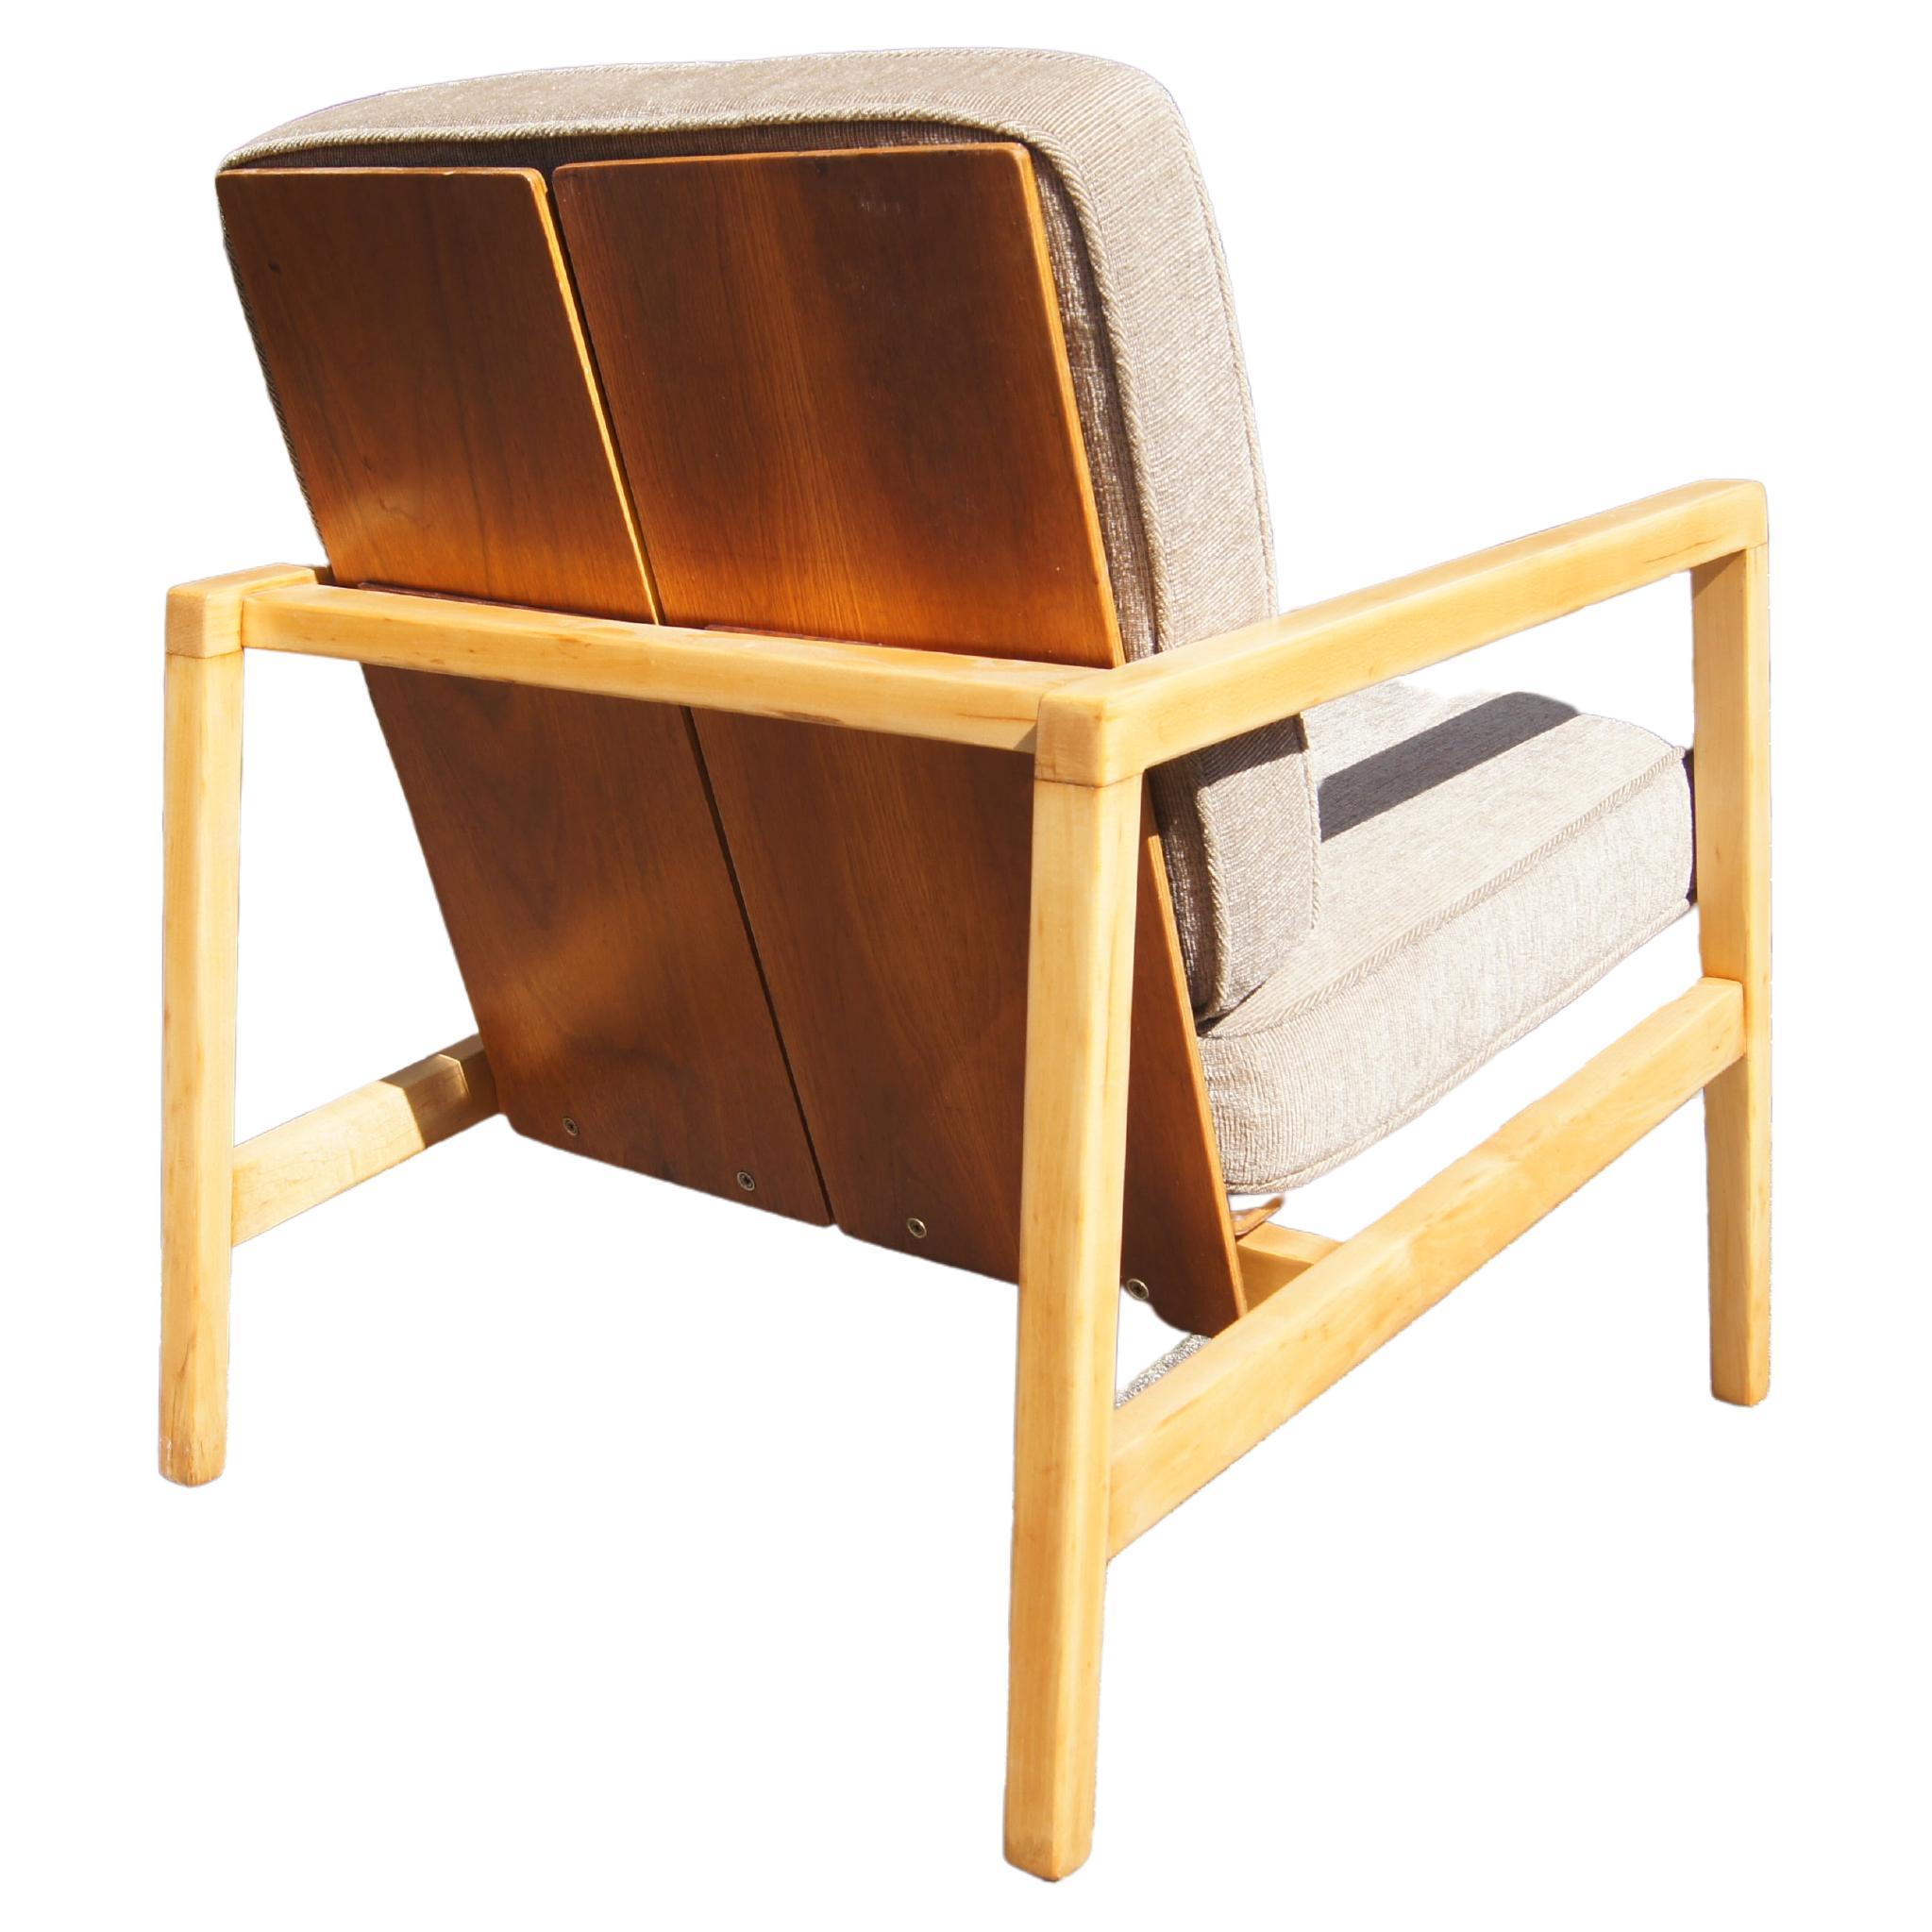 Maple and Walnut Lounge Chair, Model 645, by Lewis Butler for Knoll Associates